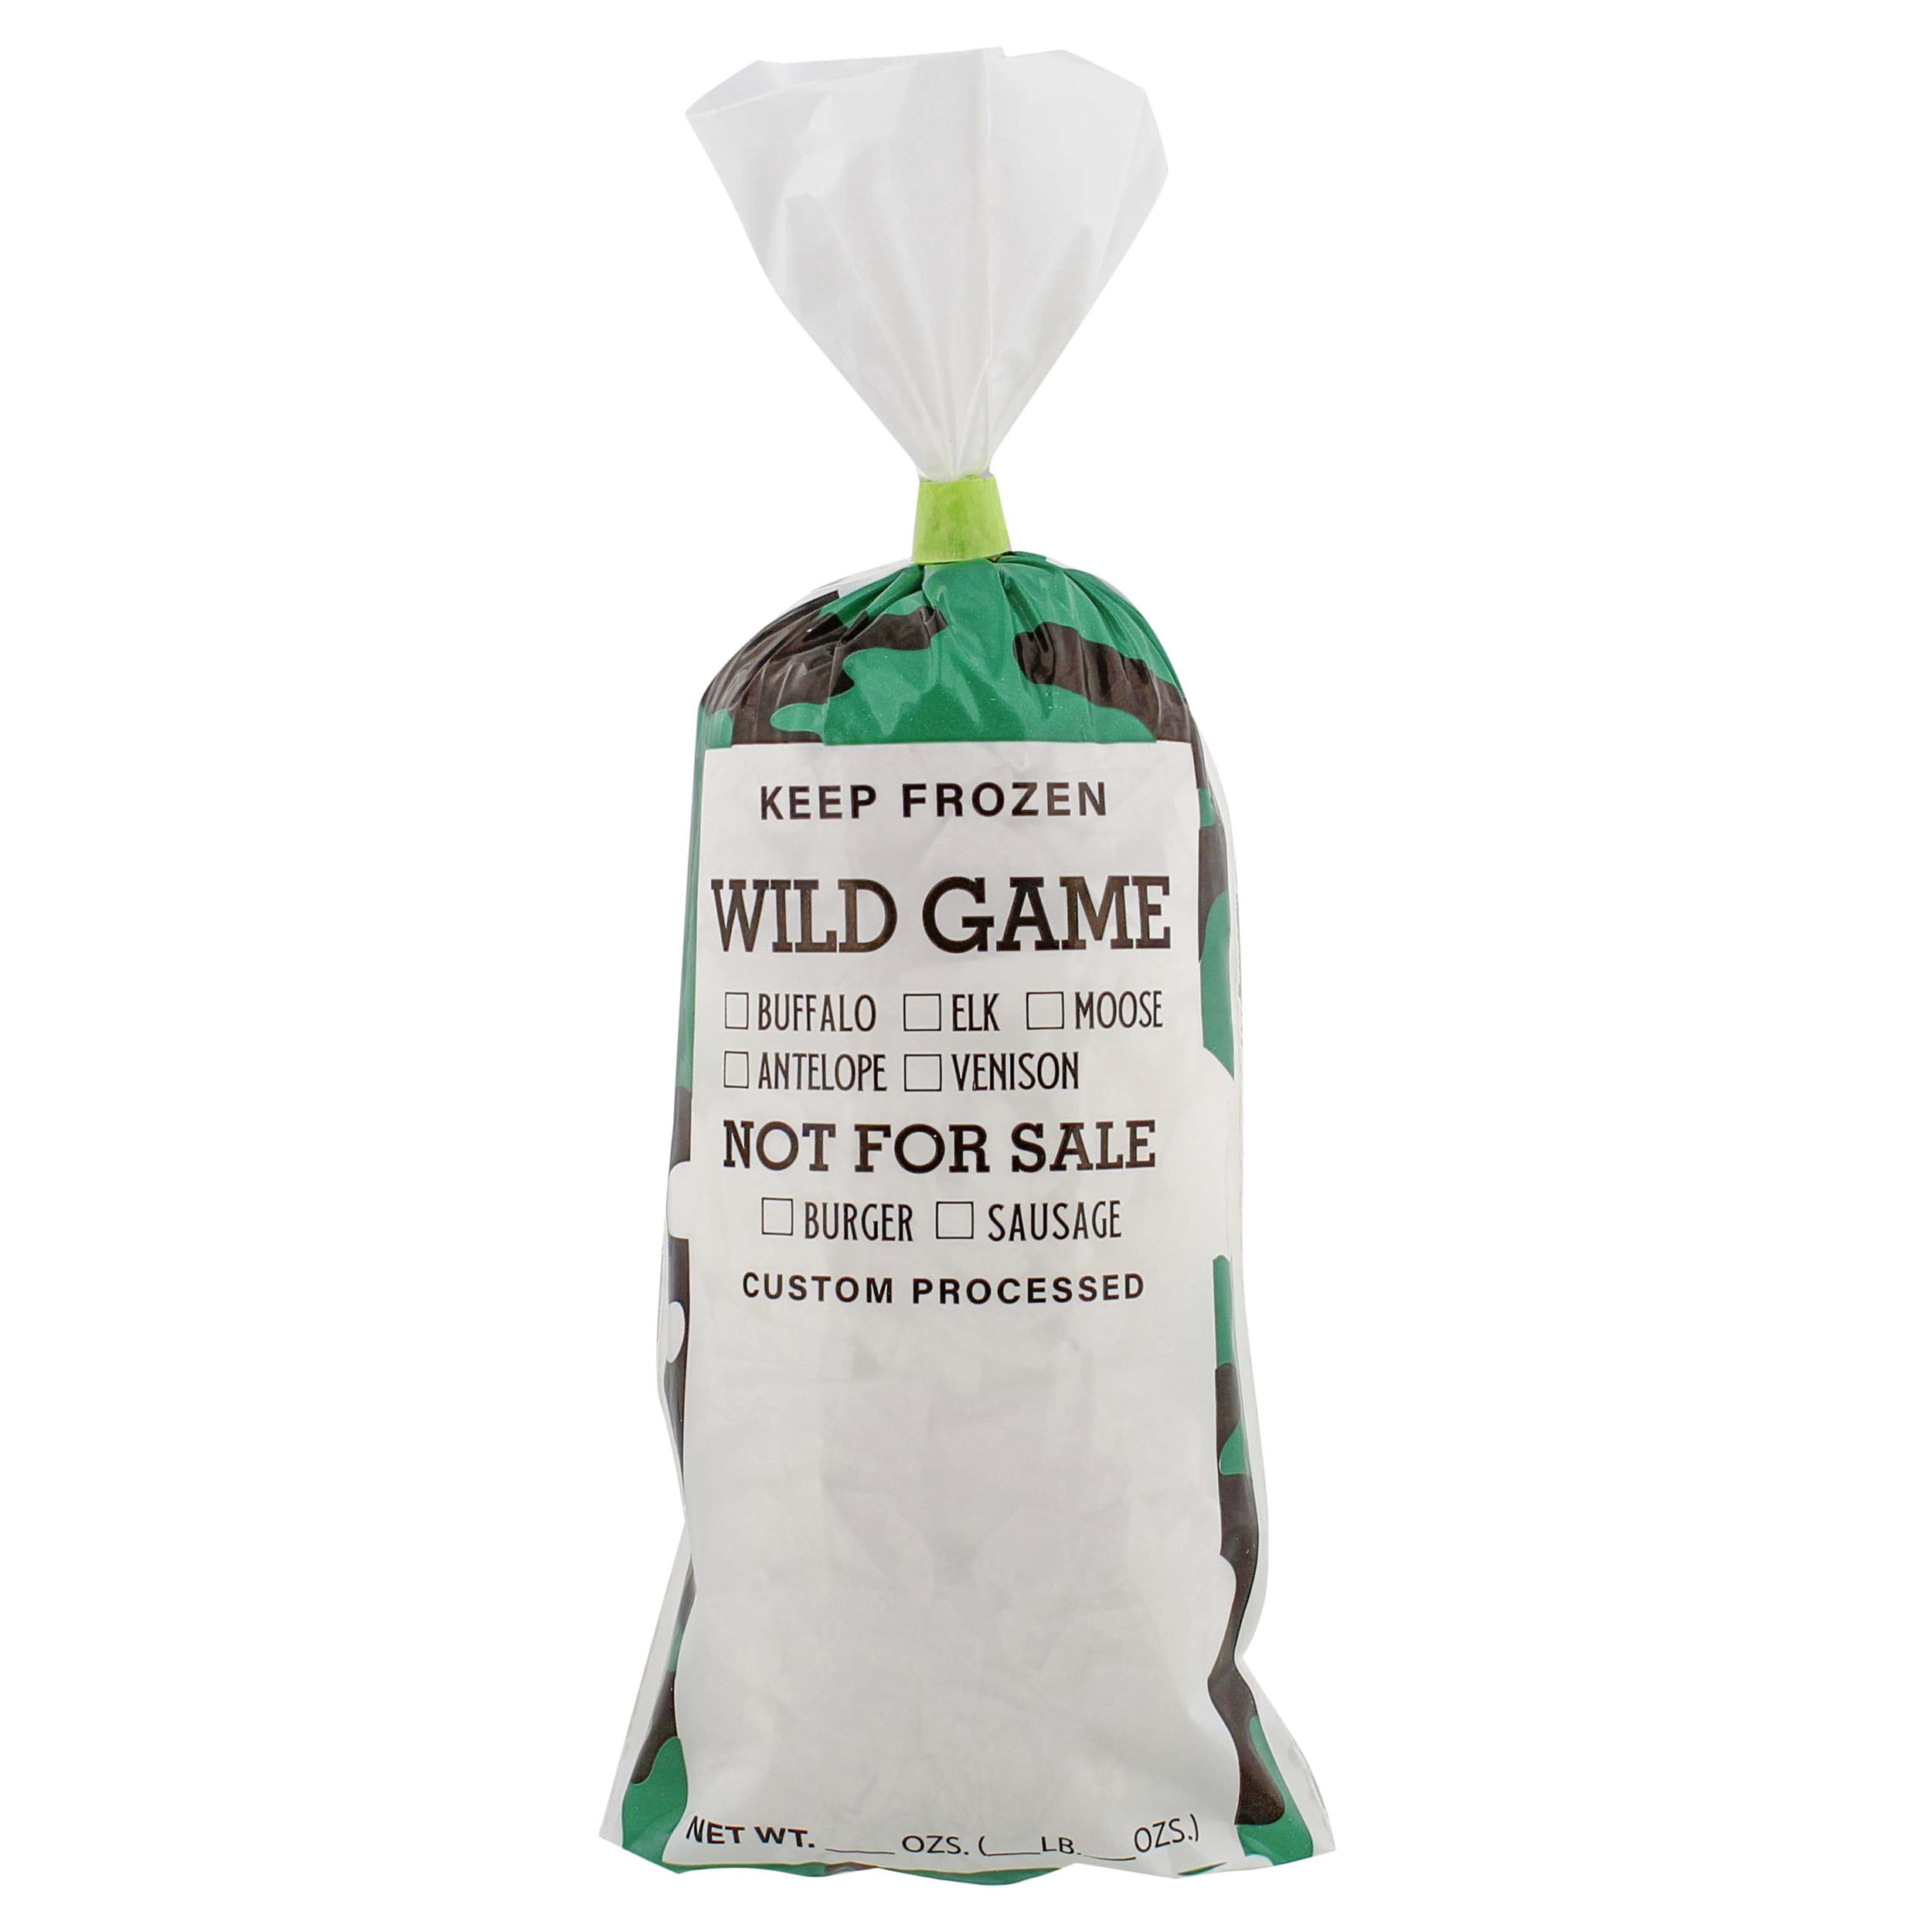 Aussio (150-Pack) Wild Game Meat Bags (1 Lb Capacity) - 10.5 x